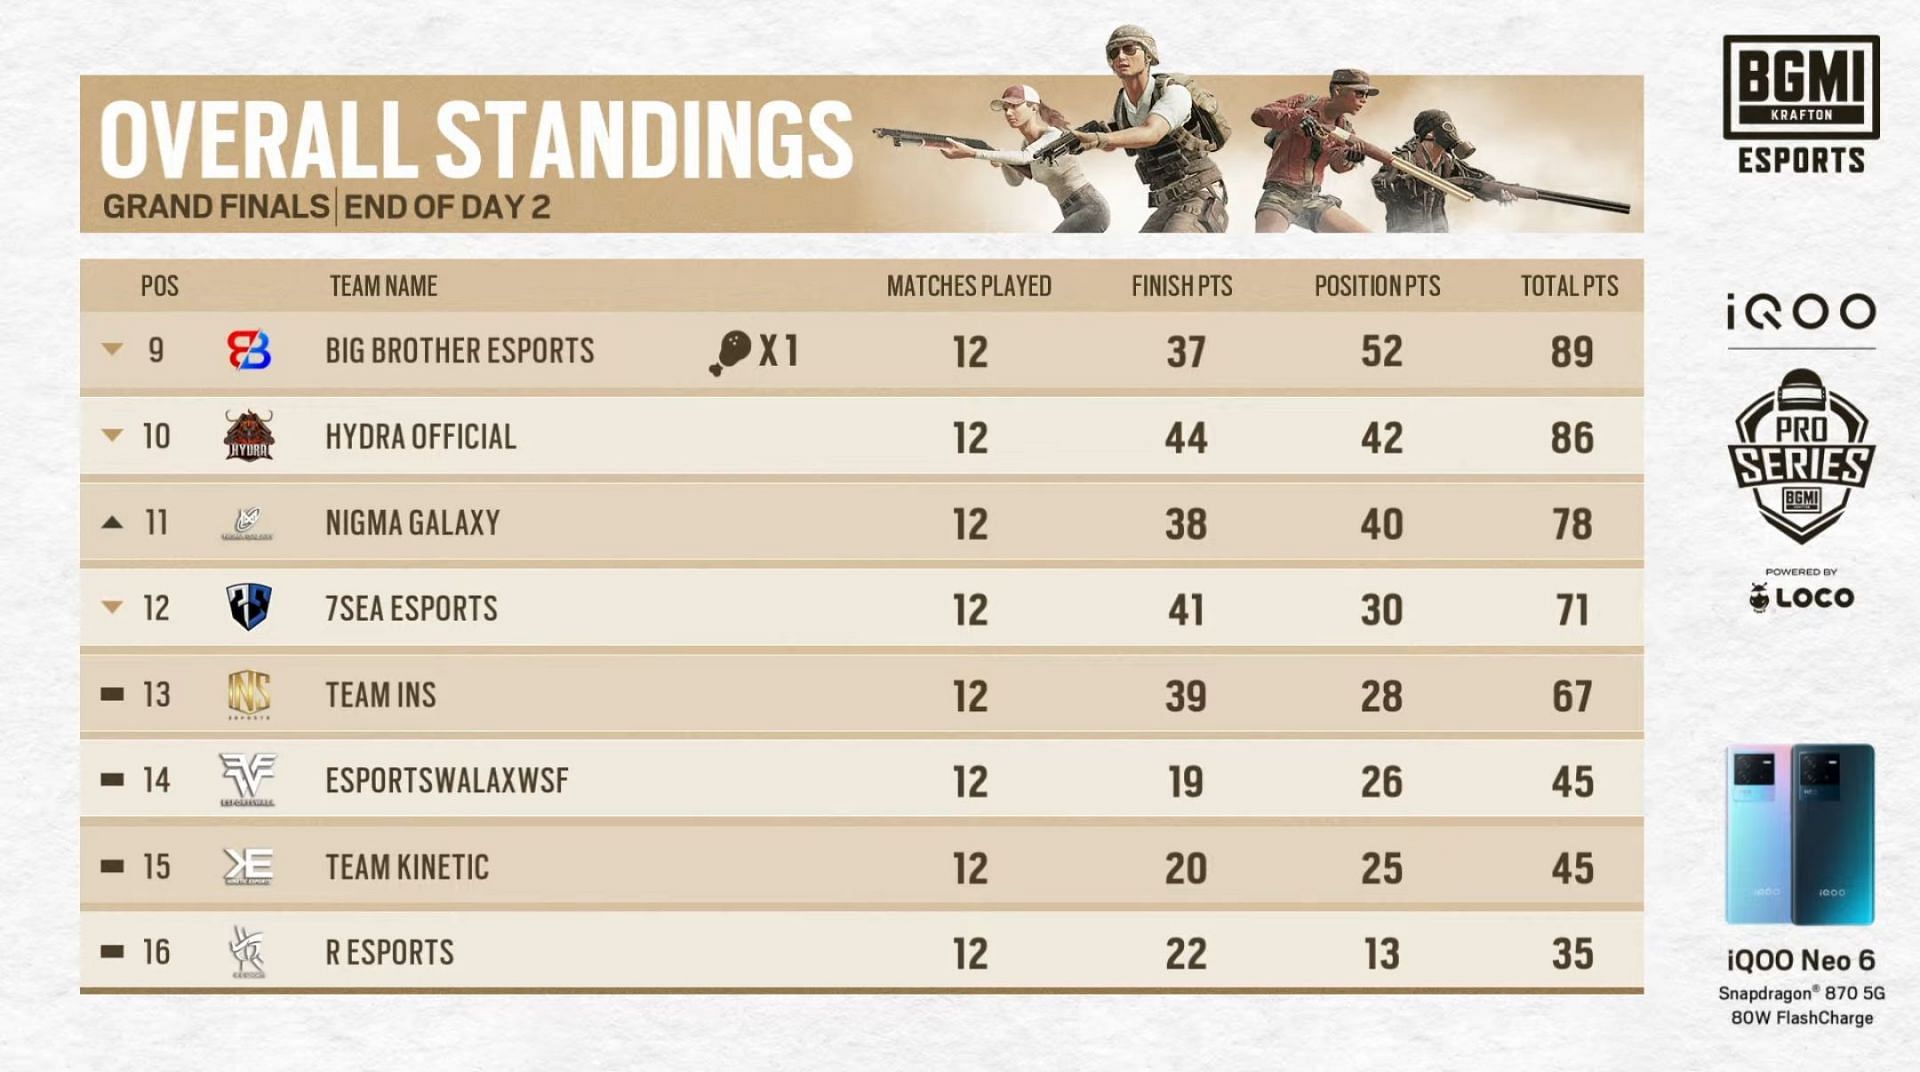 Nigma Galaxy finished 11th after BMPS Finals day 2 (Image via BGMI)